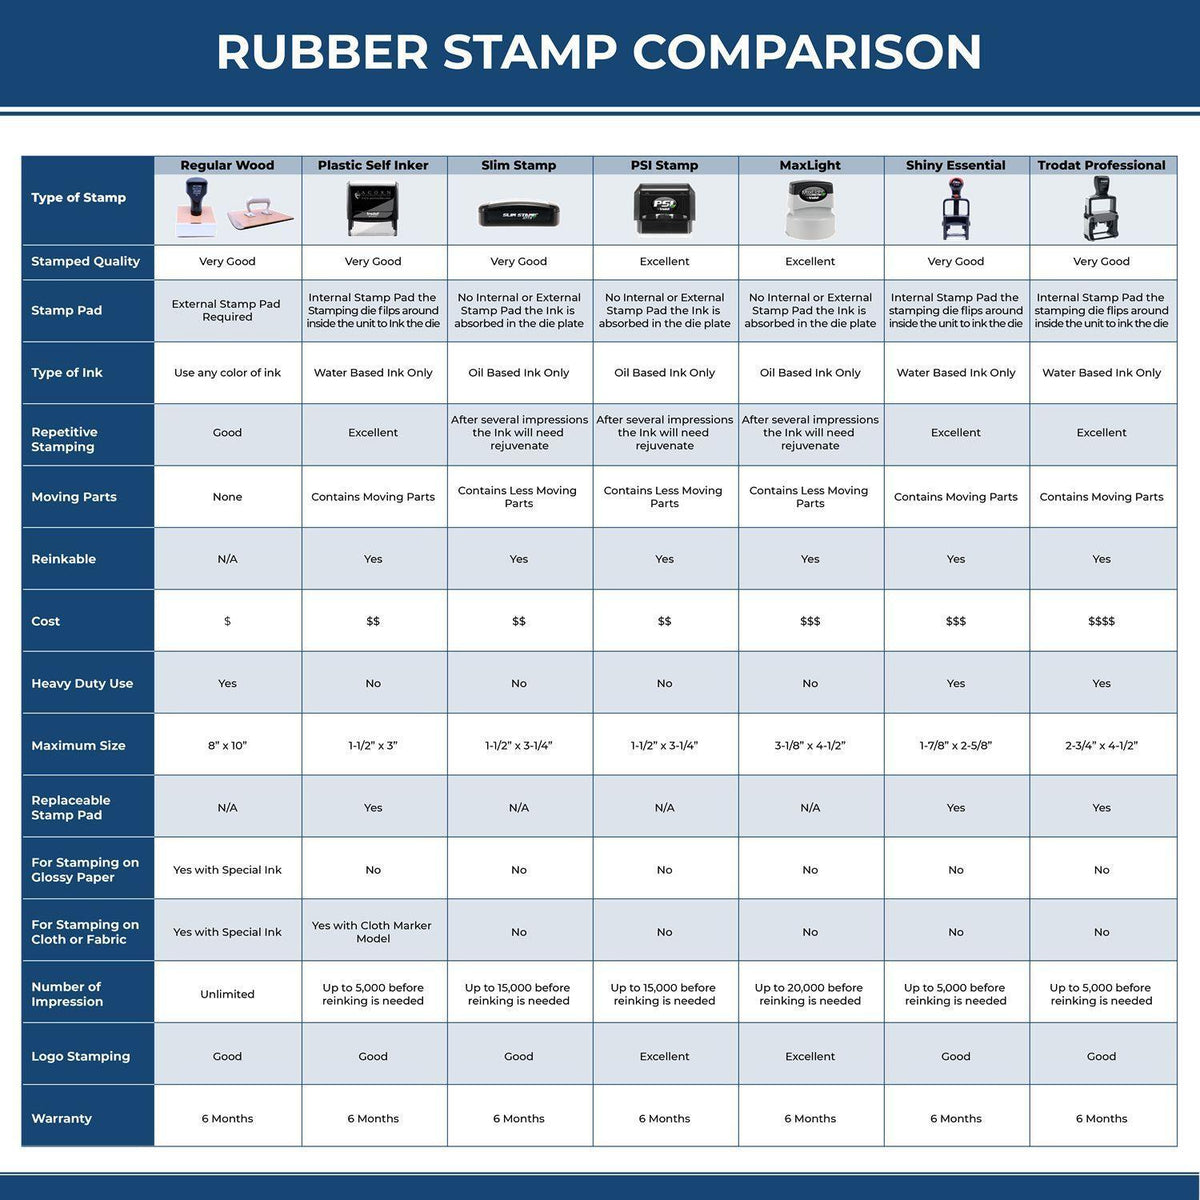 Large Pre Inked Not In Budget Stamp 4641SLIM Rubber Stamp Comparison